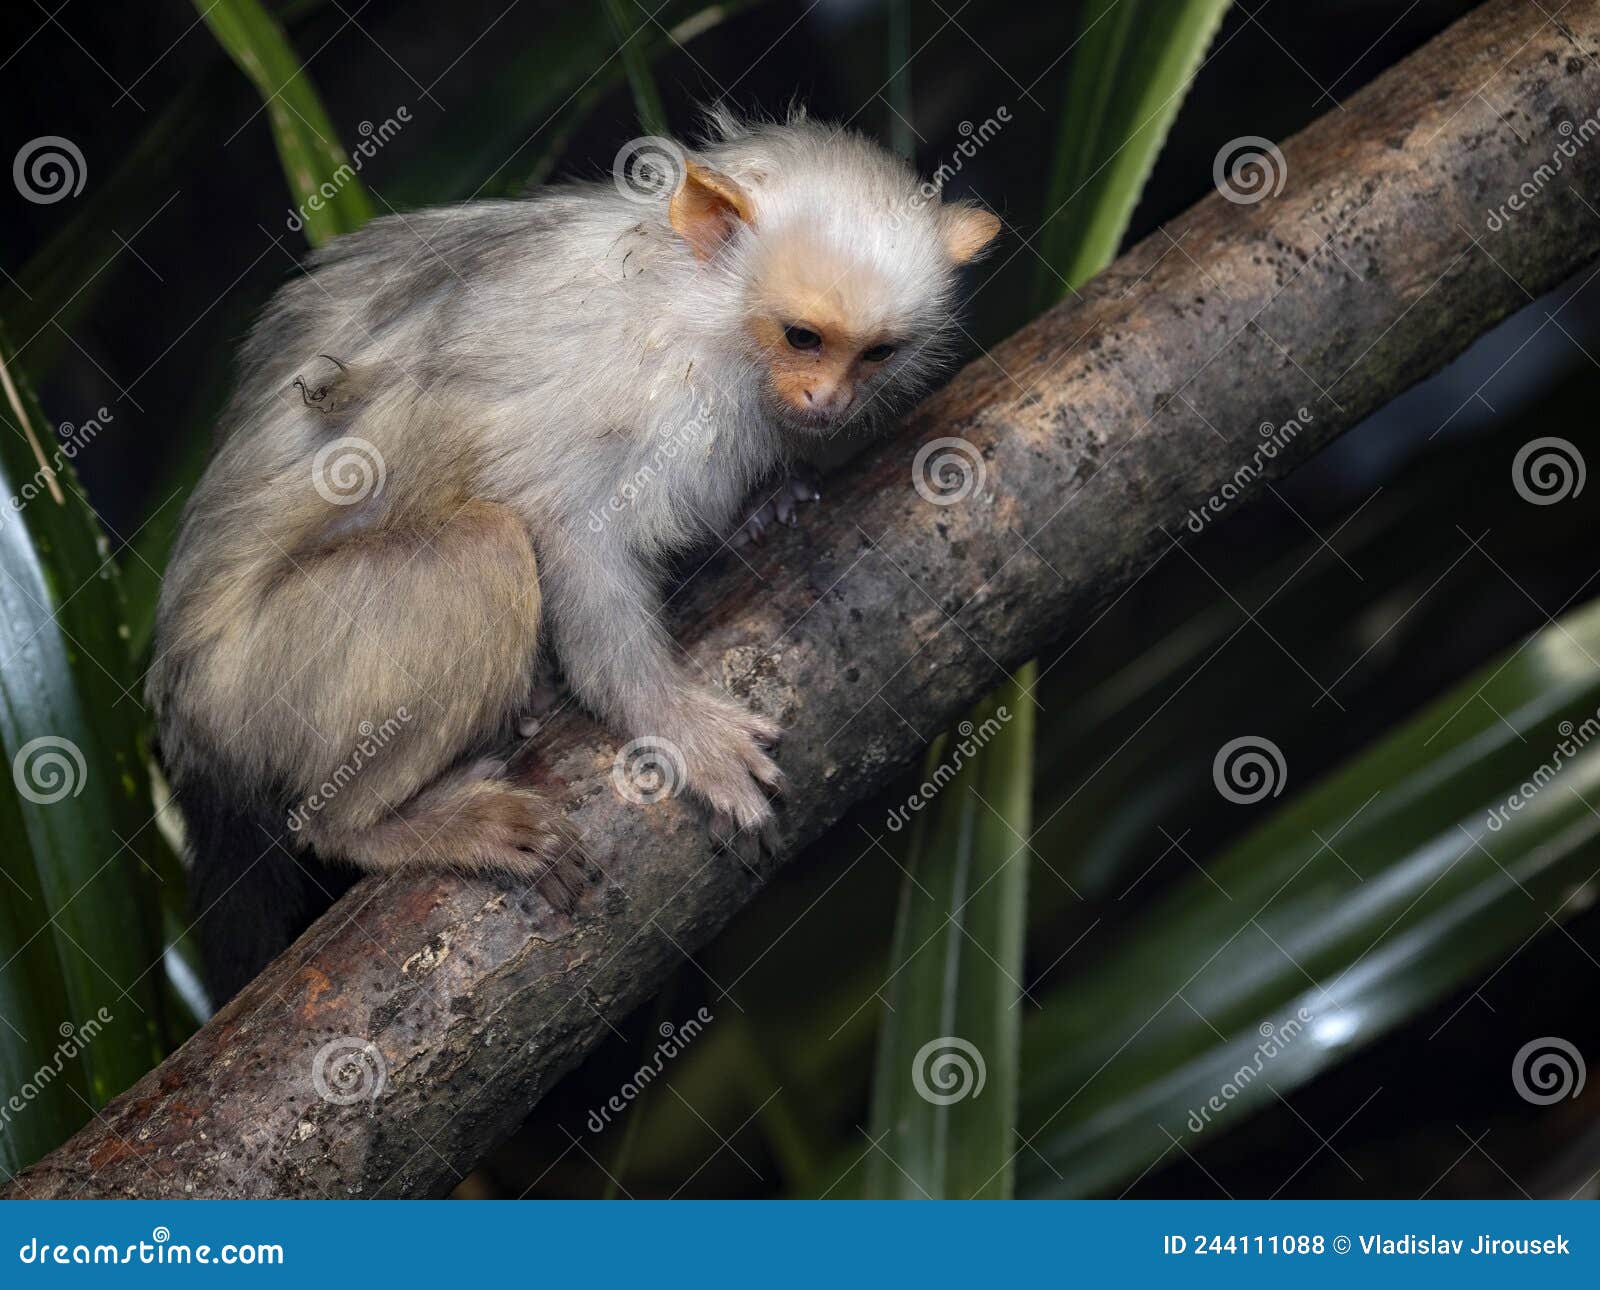 silvery marmoset, mico argentatus, sits on a branch and watches the surroundings